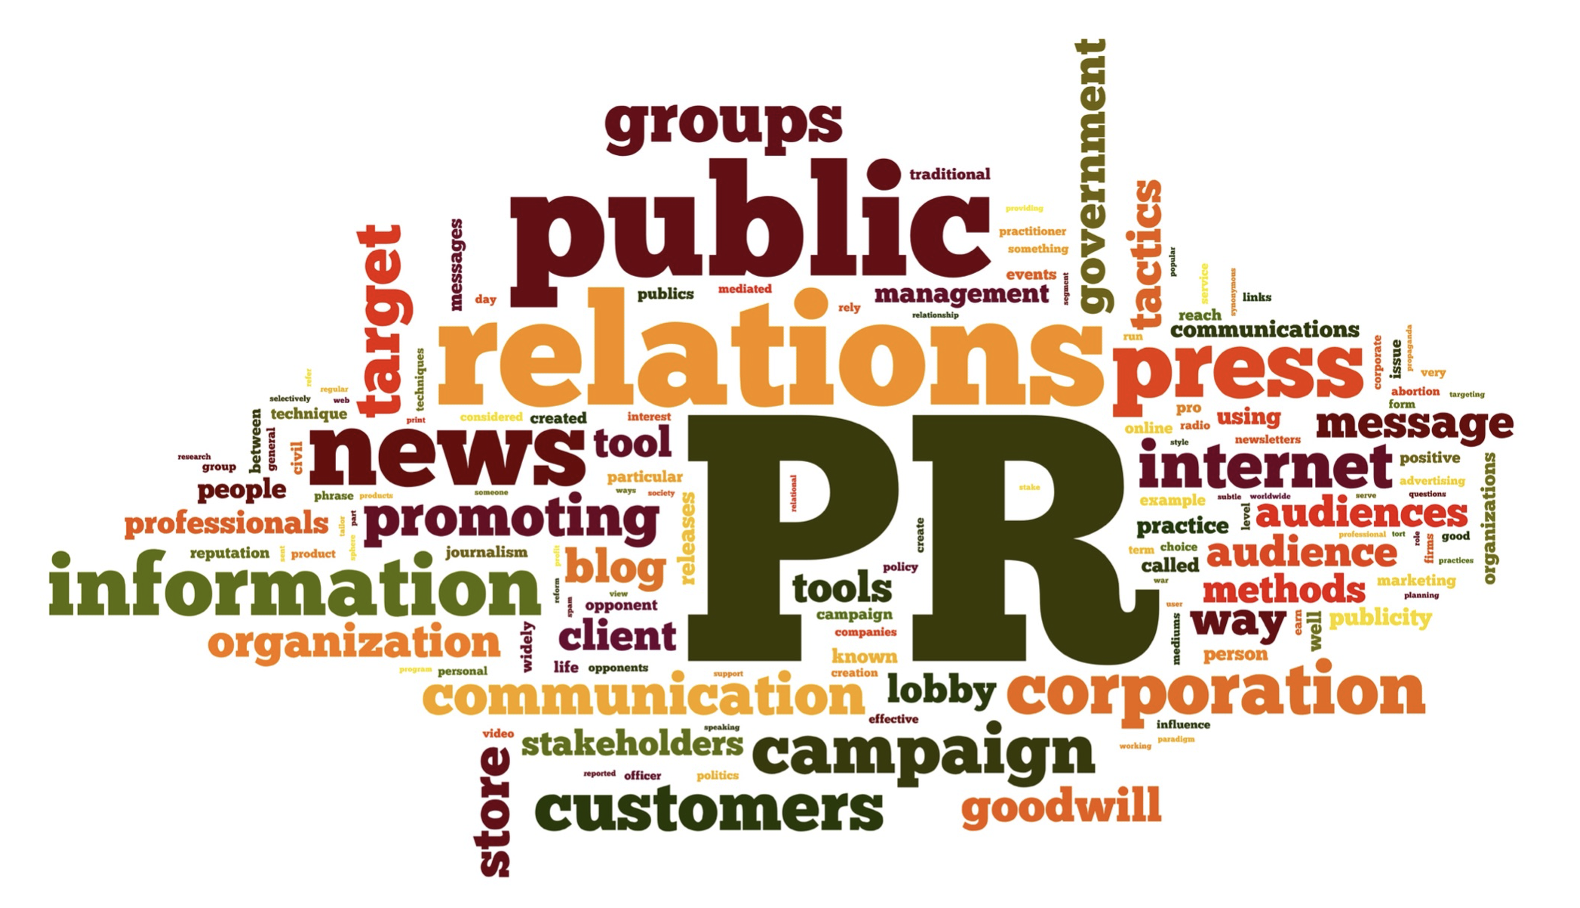 How Does Public Relations Differ From Similar Fields Like Advertising